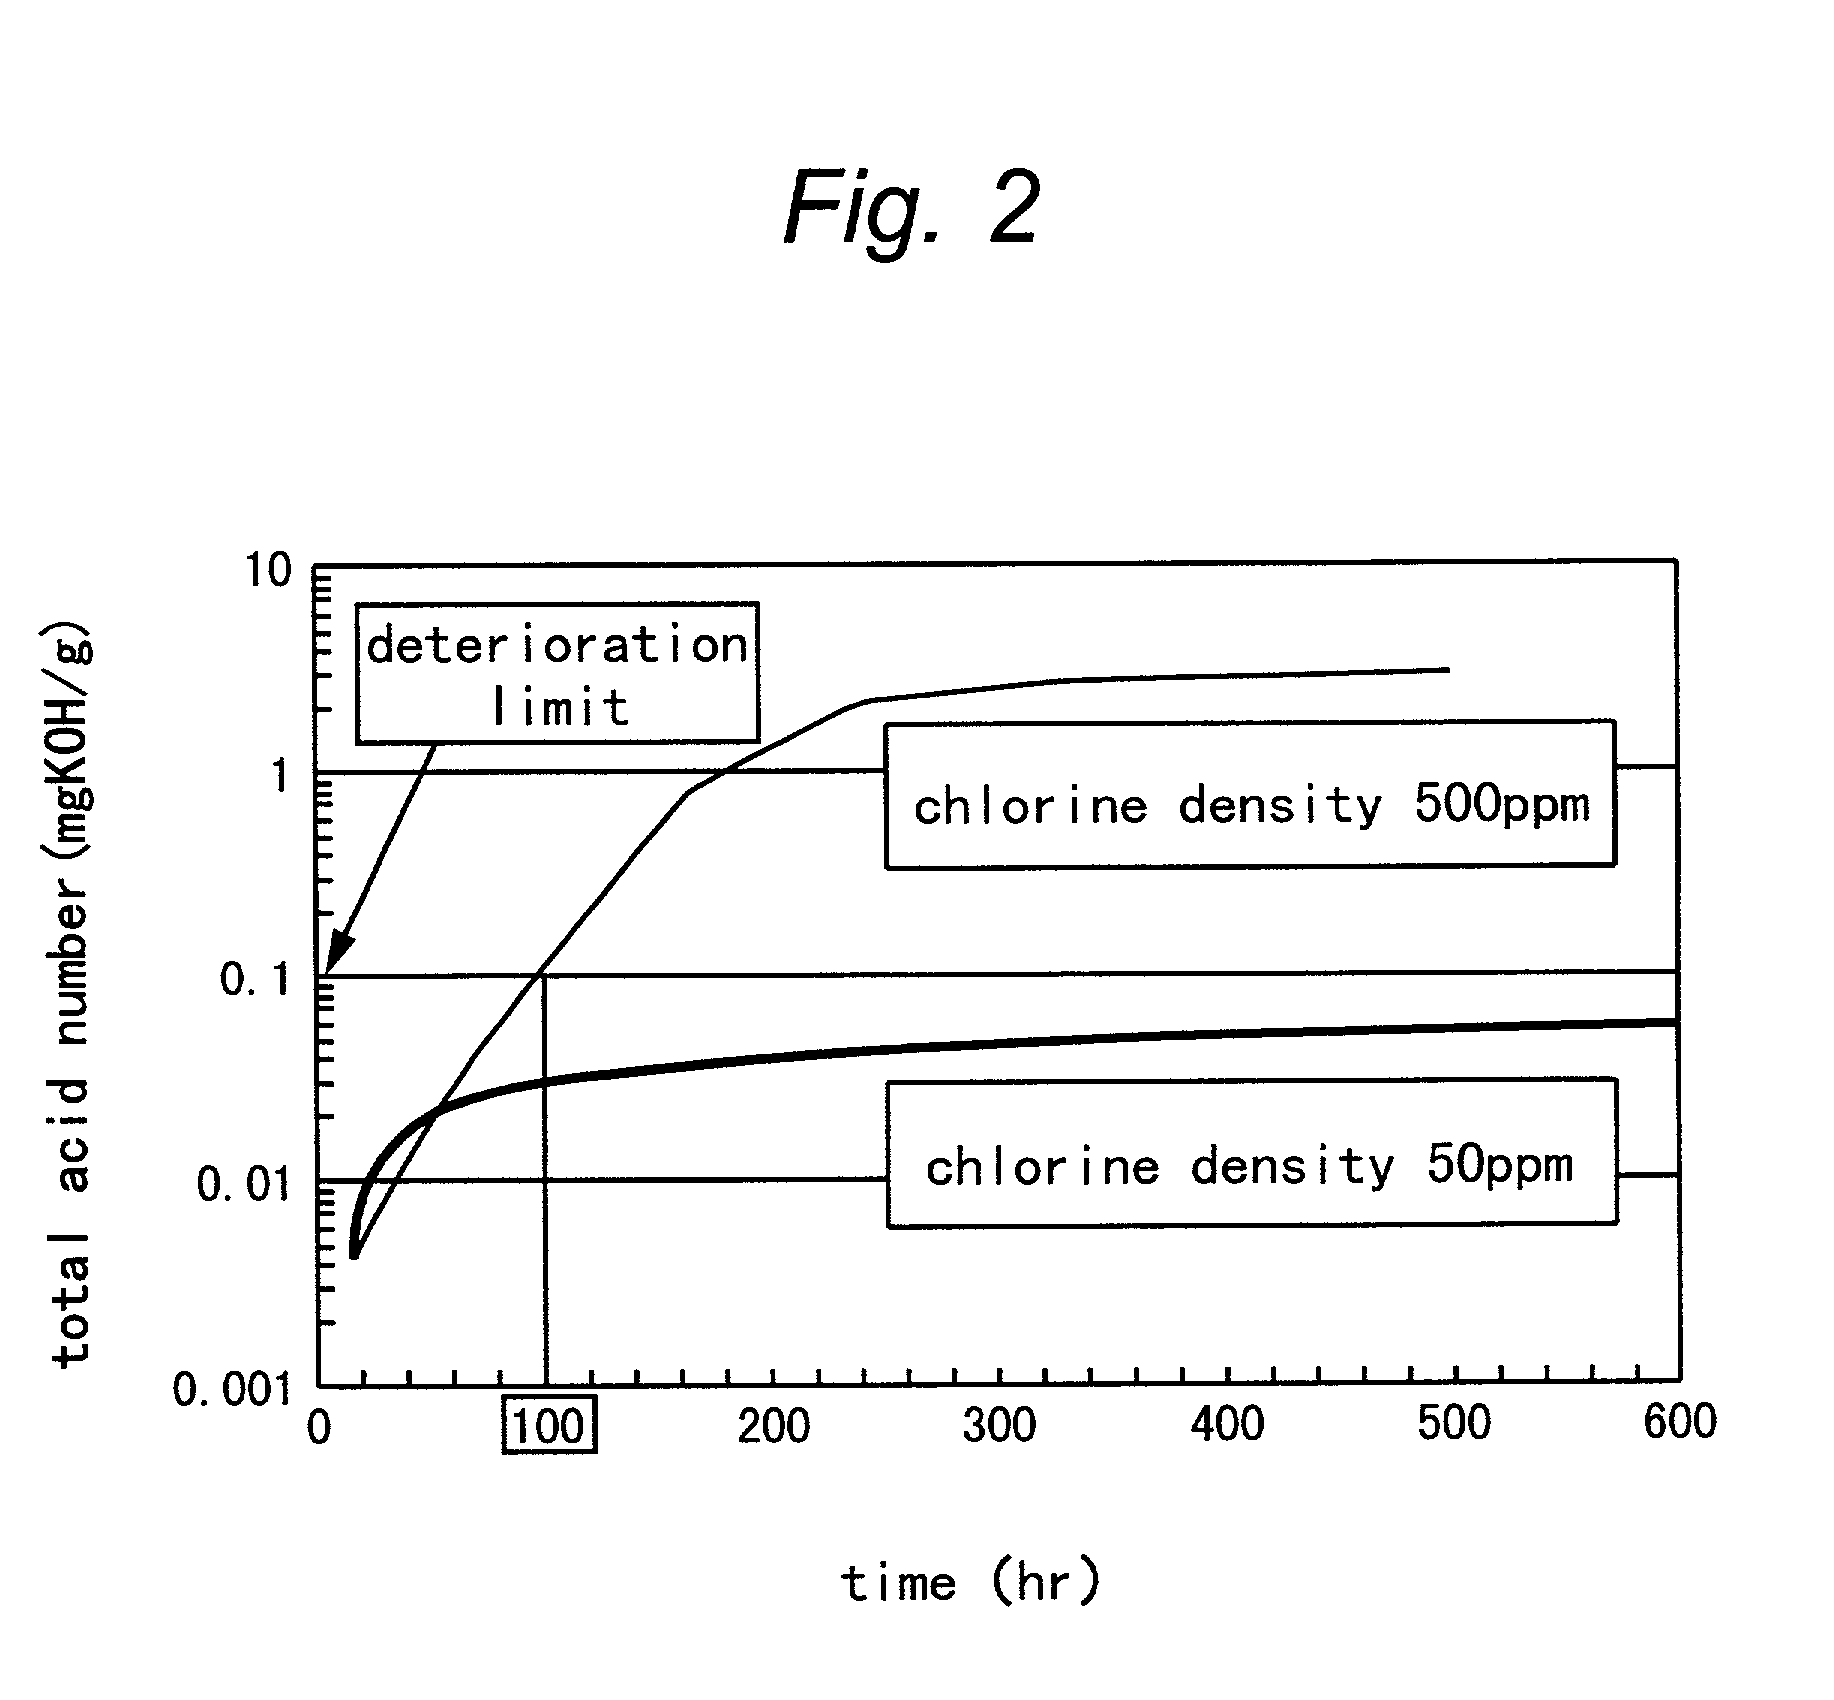 Refrigeration system, and method of updating and operating the same